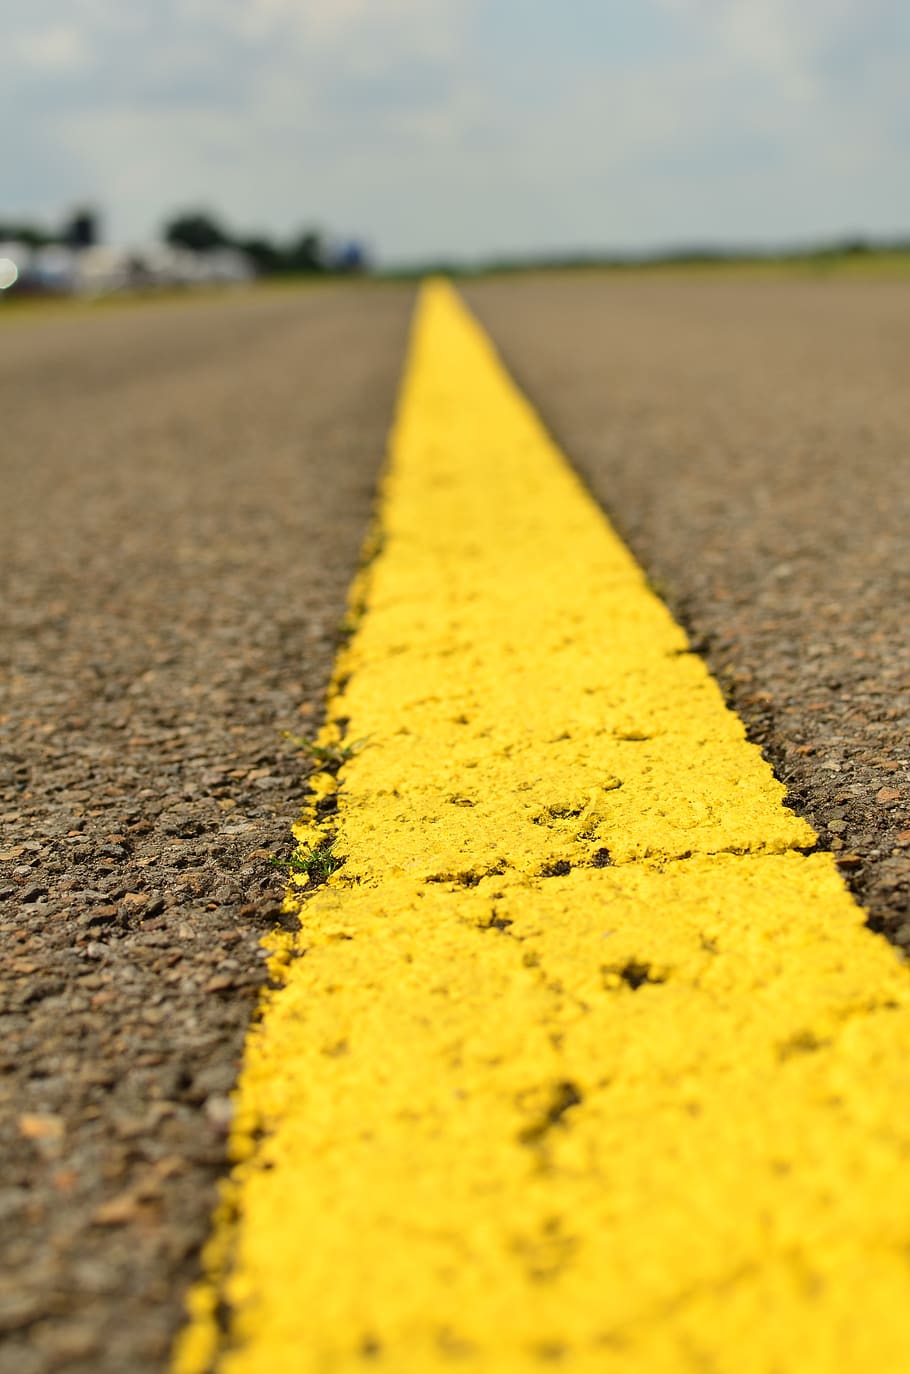 asphalt, road, instructions, roadway, yellow, road marking, direction, marking, the way forward, surface level